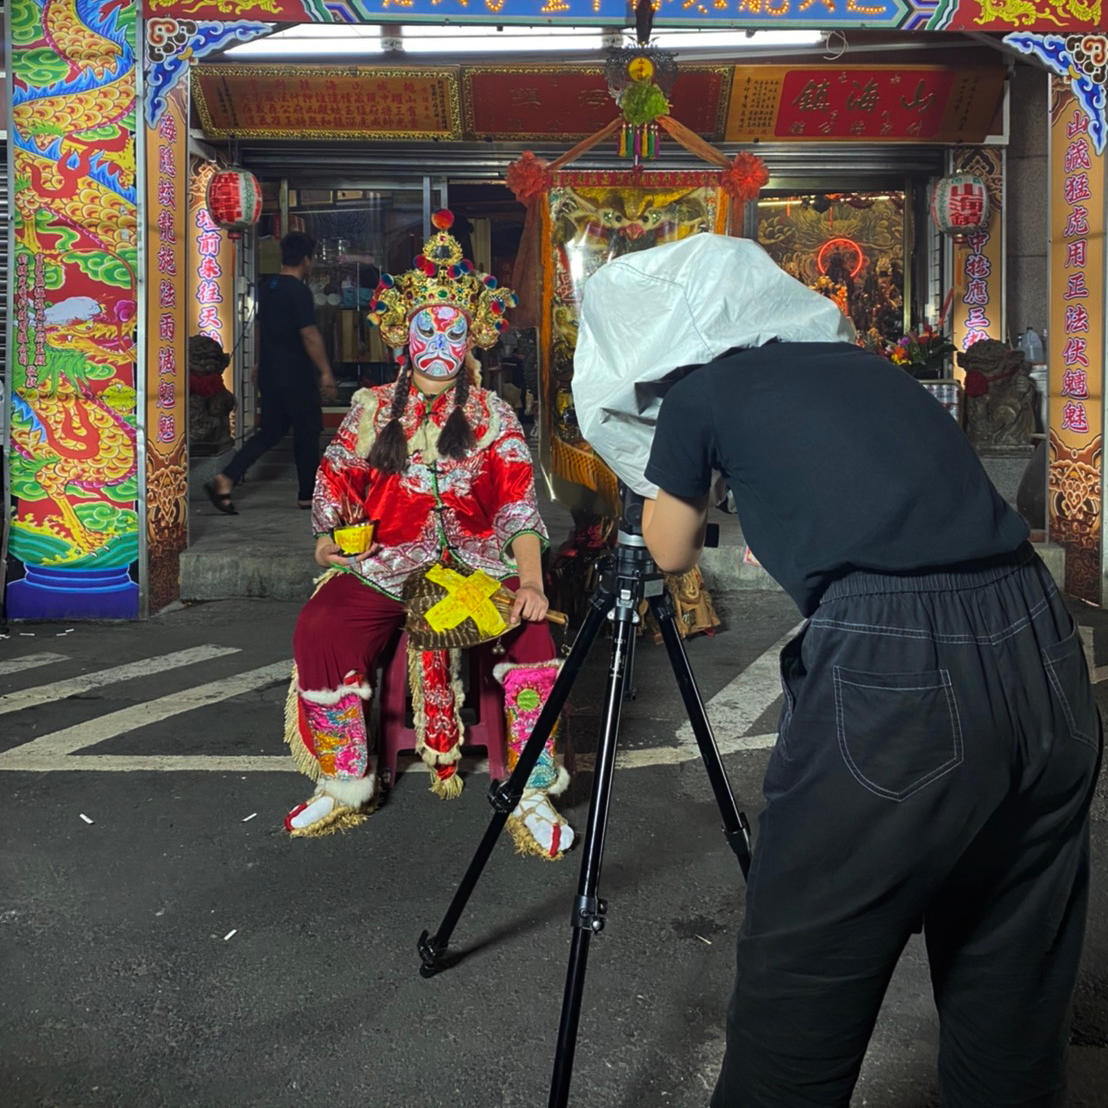 A person wearing all-black clothing taking an image of traditional Chinese culture